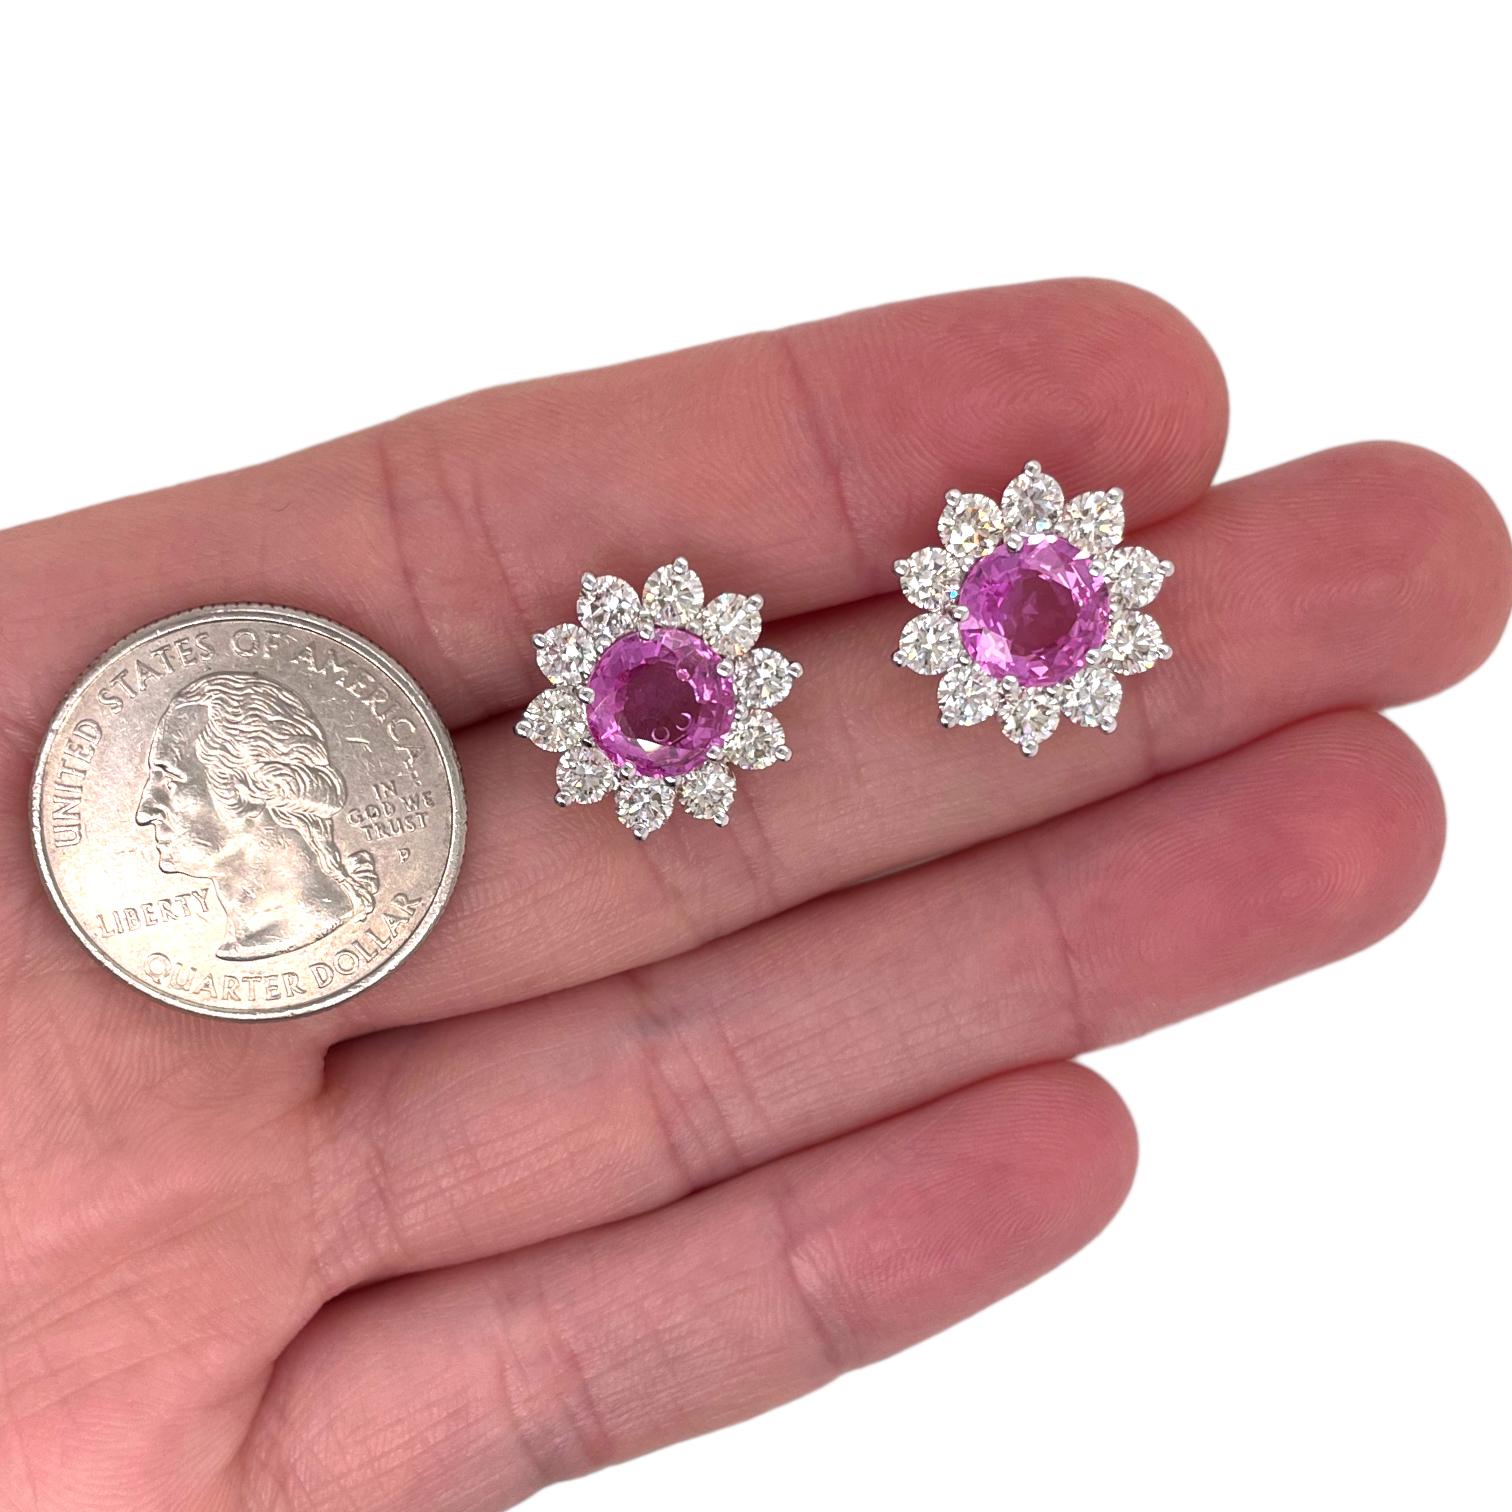 Stud earrings contain 2 finely matched round brilliant cut pink sapphires, 5.08tcw.. Surrounding pink sapphires are round brilliant diamonds creating a halo, totaling 3.08tcw. Diamonds are near colorless and VS2 in clarity, excellent cut. Stones are